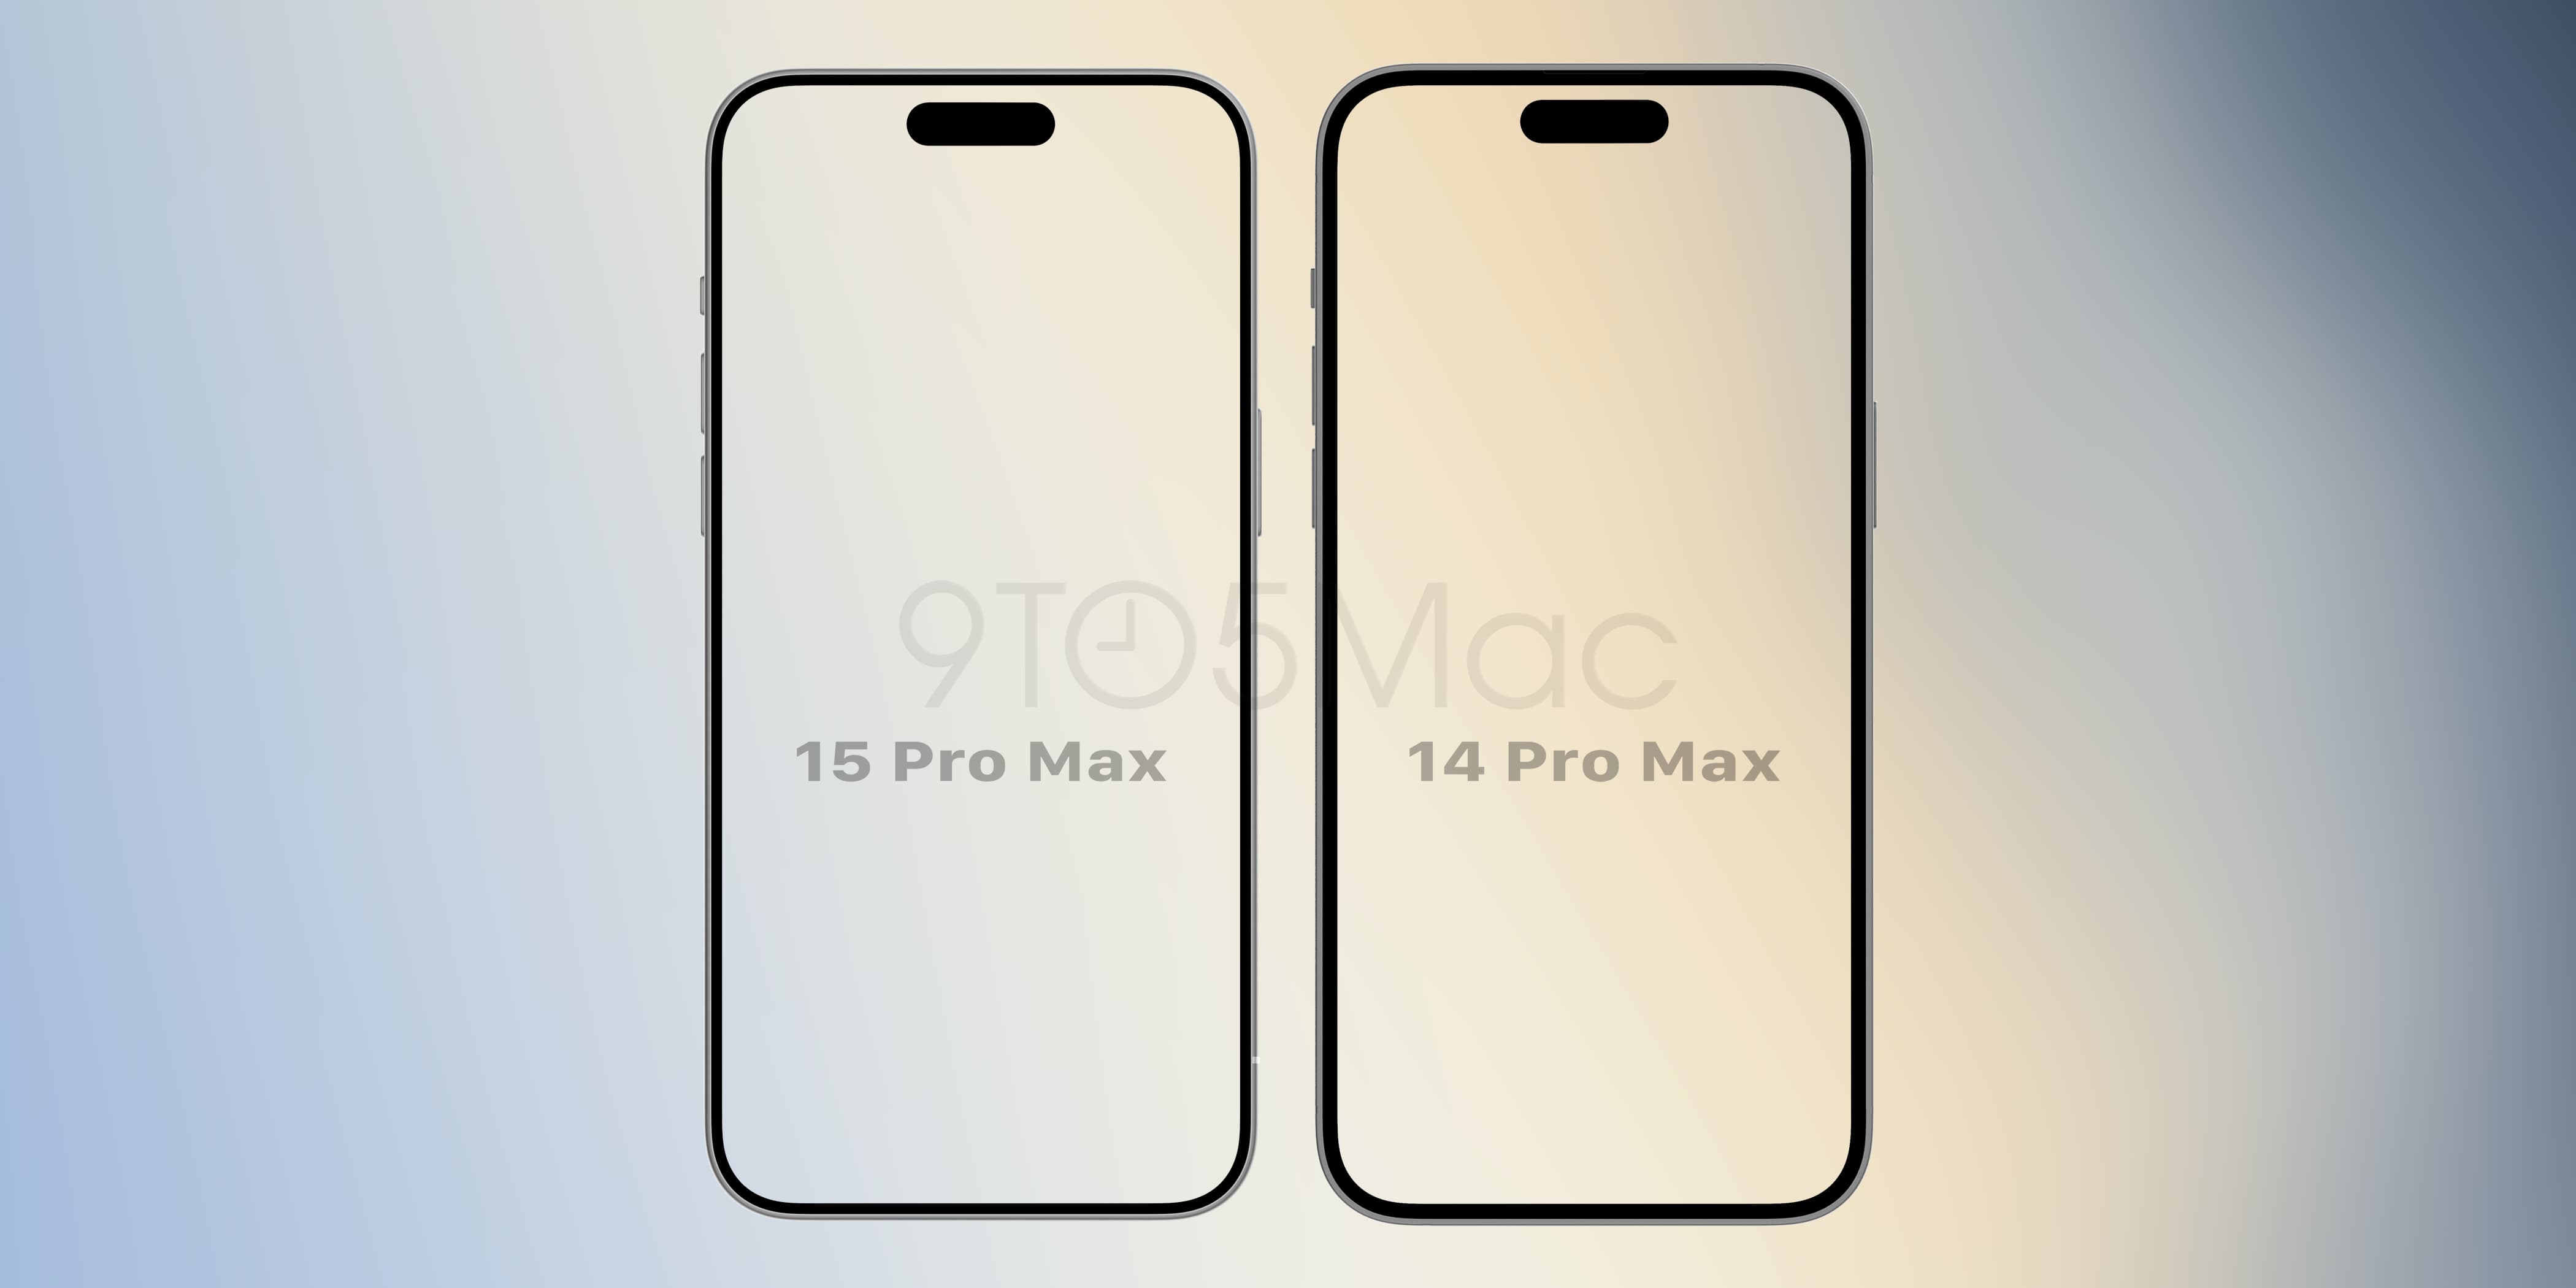 iPhone 15 Pro could come with 8GB RAM, up to 1TB storage, likely to retain  starting price - Tech